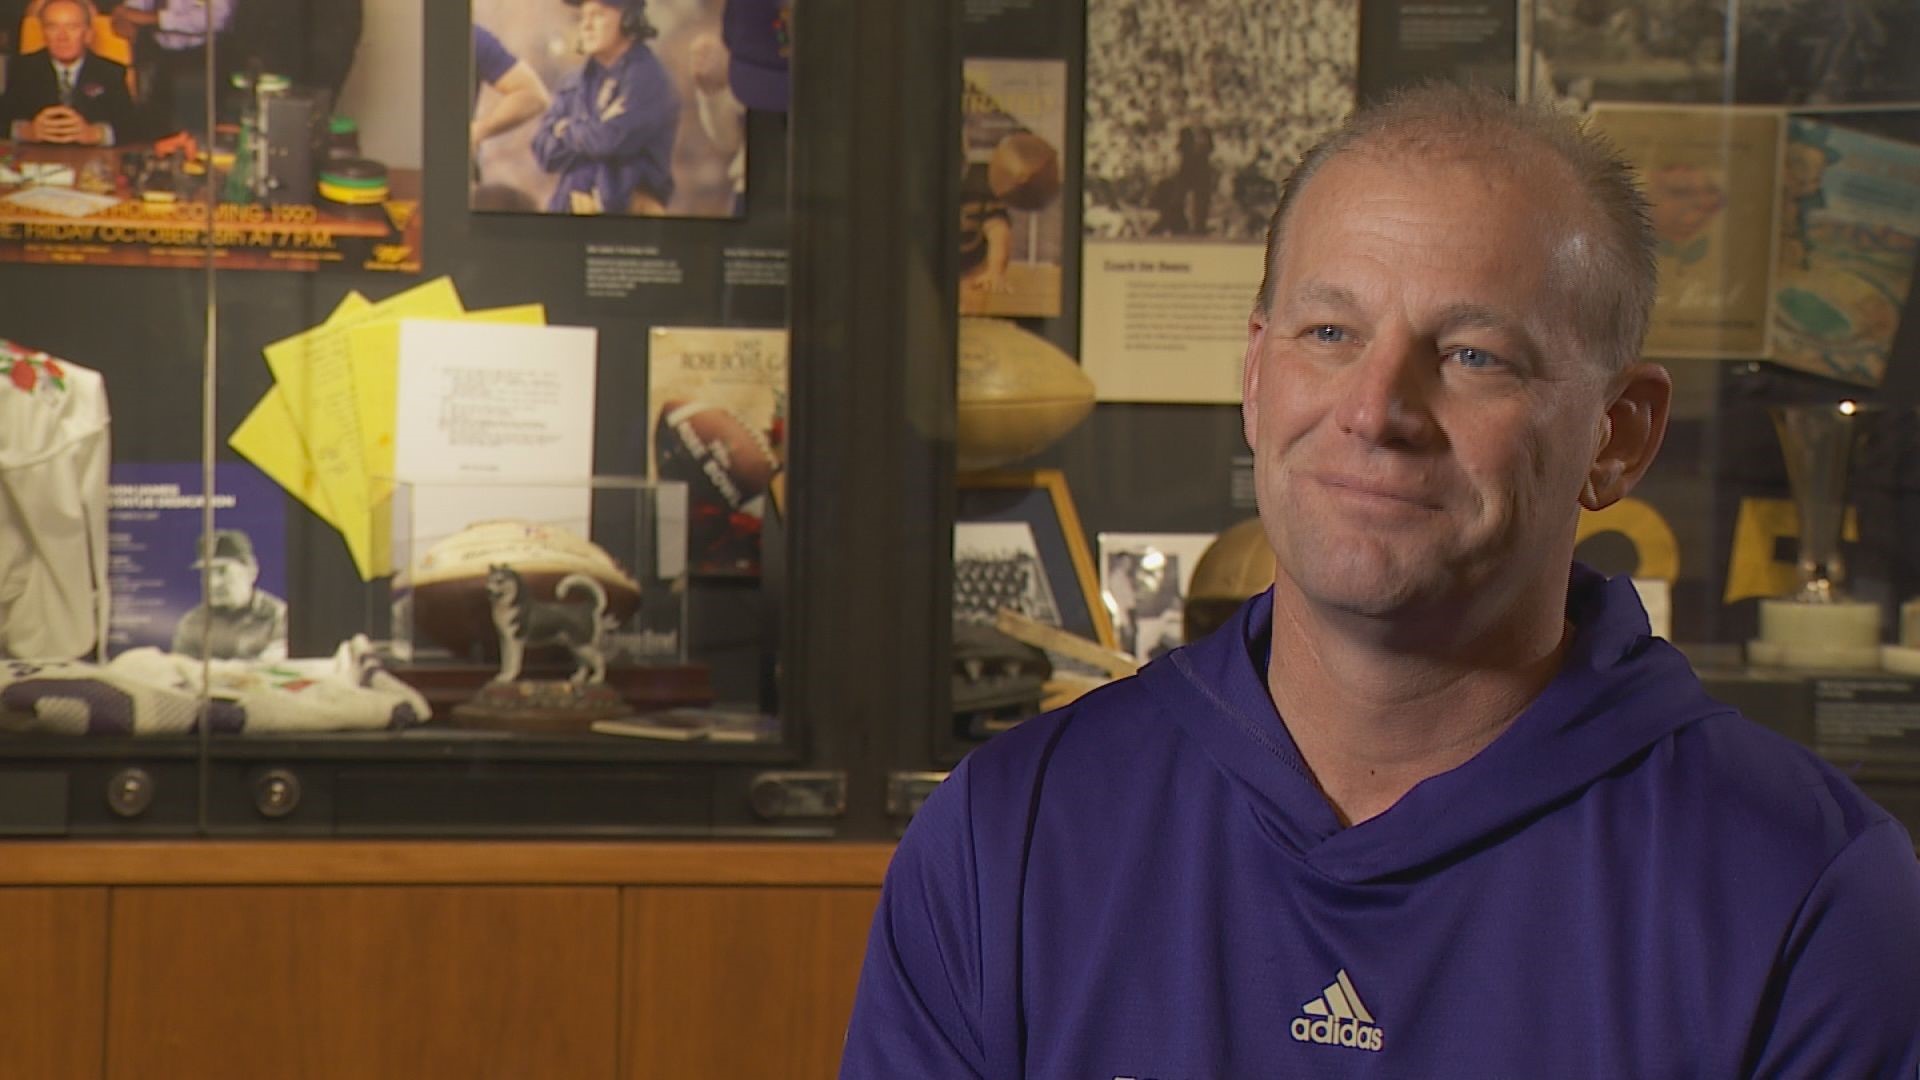 University of Washington Head Football Coach Kalen DeBoer discusses key players like Michael Penix Jr. and Rome Odunze and how the Huskies made it to the Sugar Bowl.